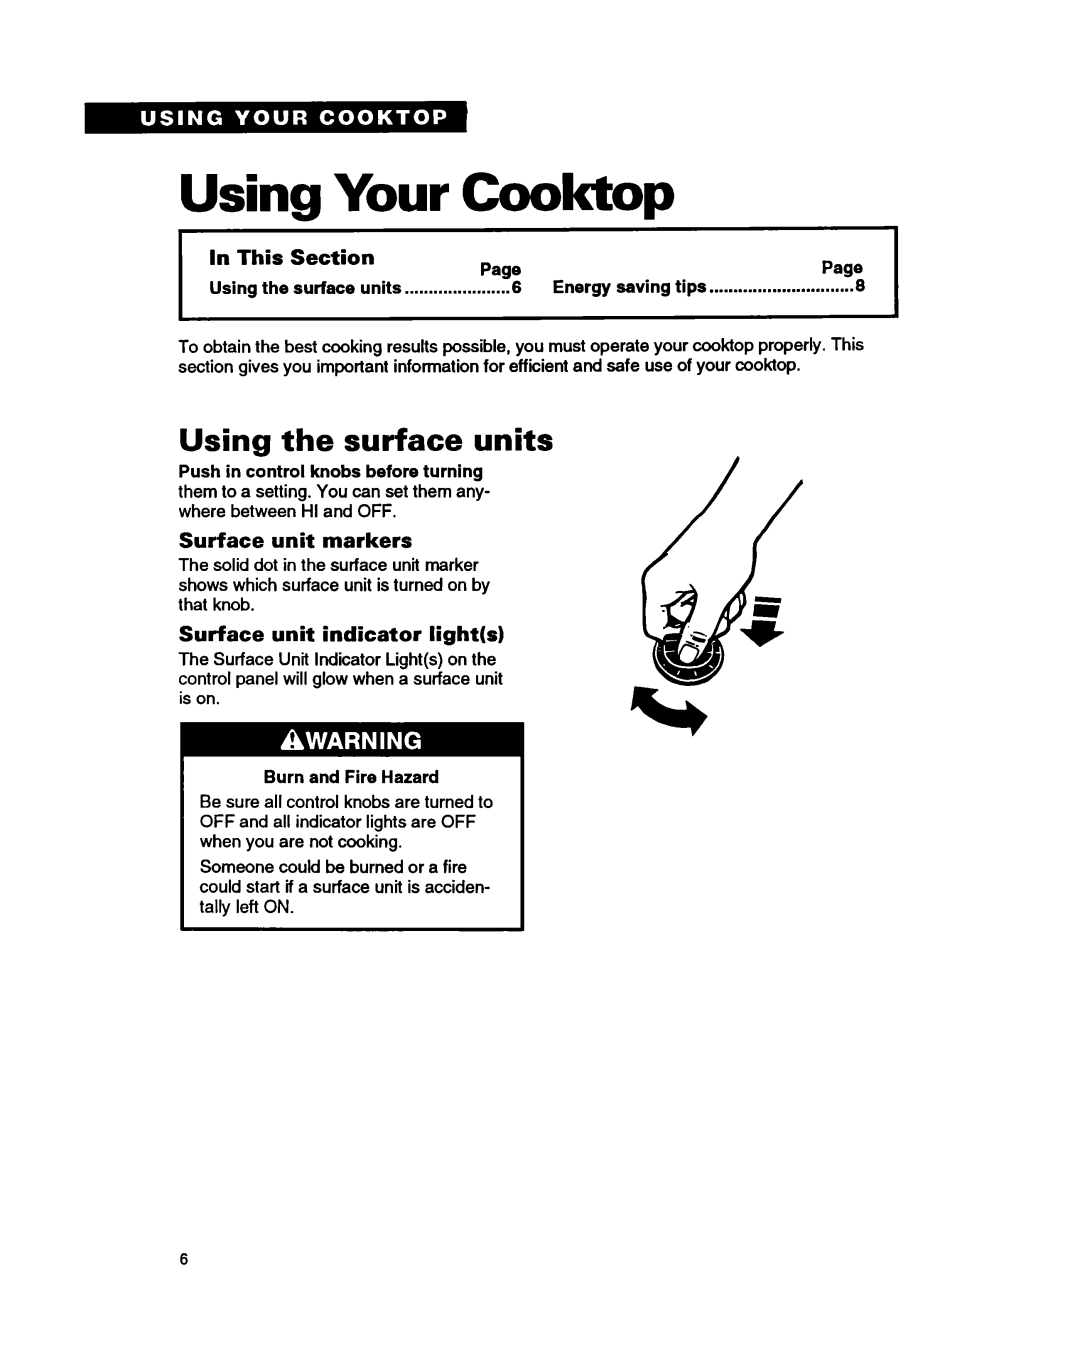 Whirlpool RC8400XA Using Your Cooktop, Using the surface units, Surface unit markers, Surface unit indicator lights 